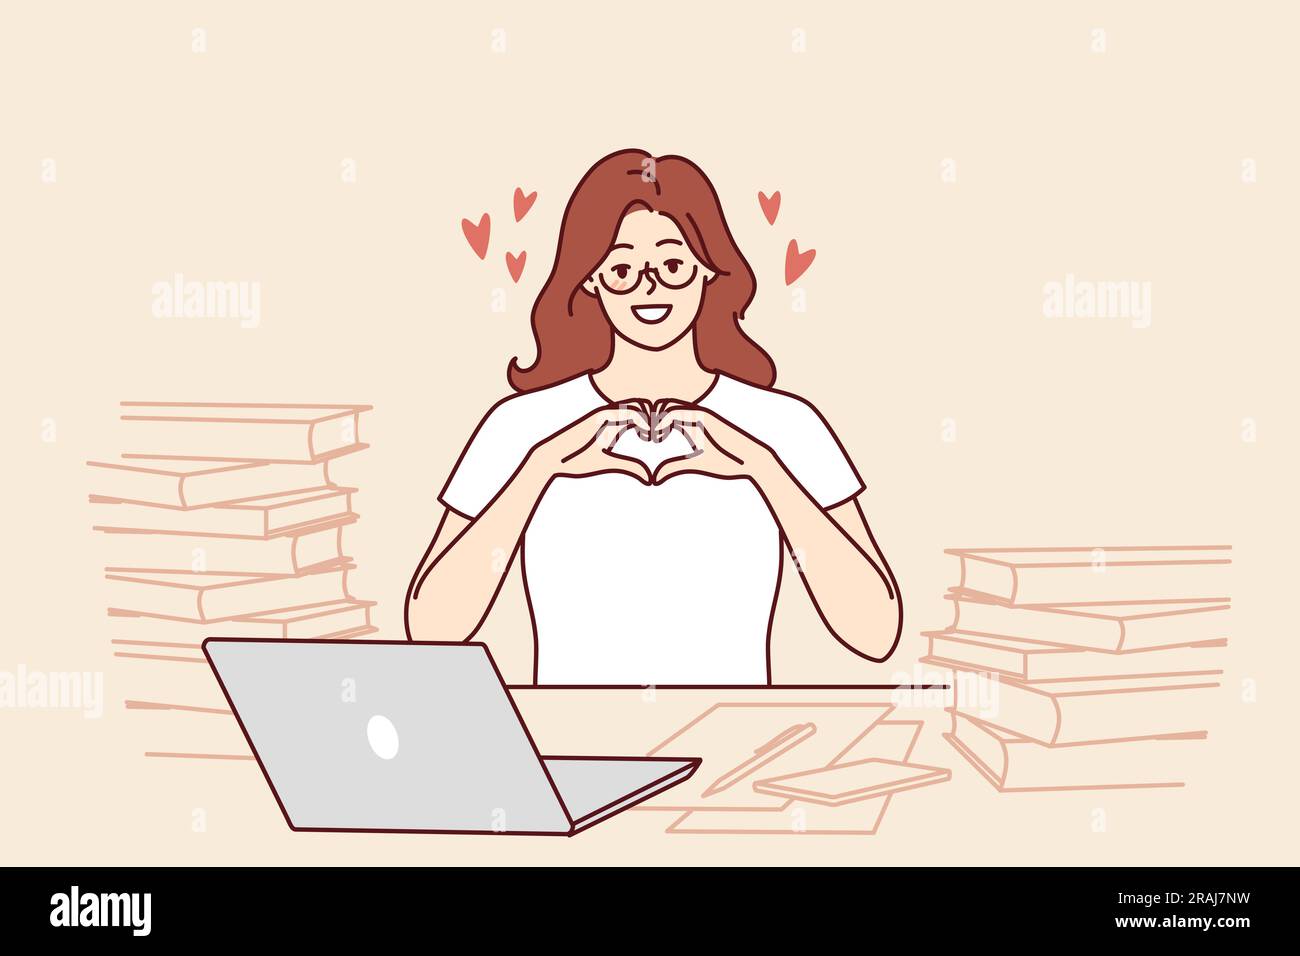 Romantic woman freelancer shows heart with fingers as token of appreciation to clients or employers. Girl in love says hello to boyfriend posing for romantic message at table with papers Stock Vector